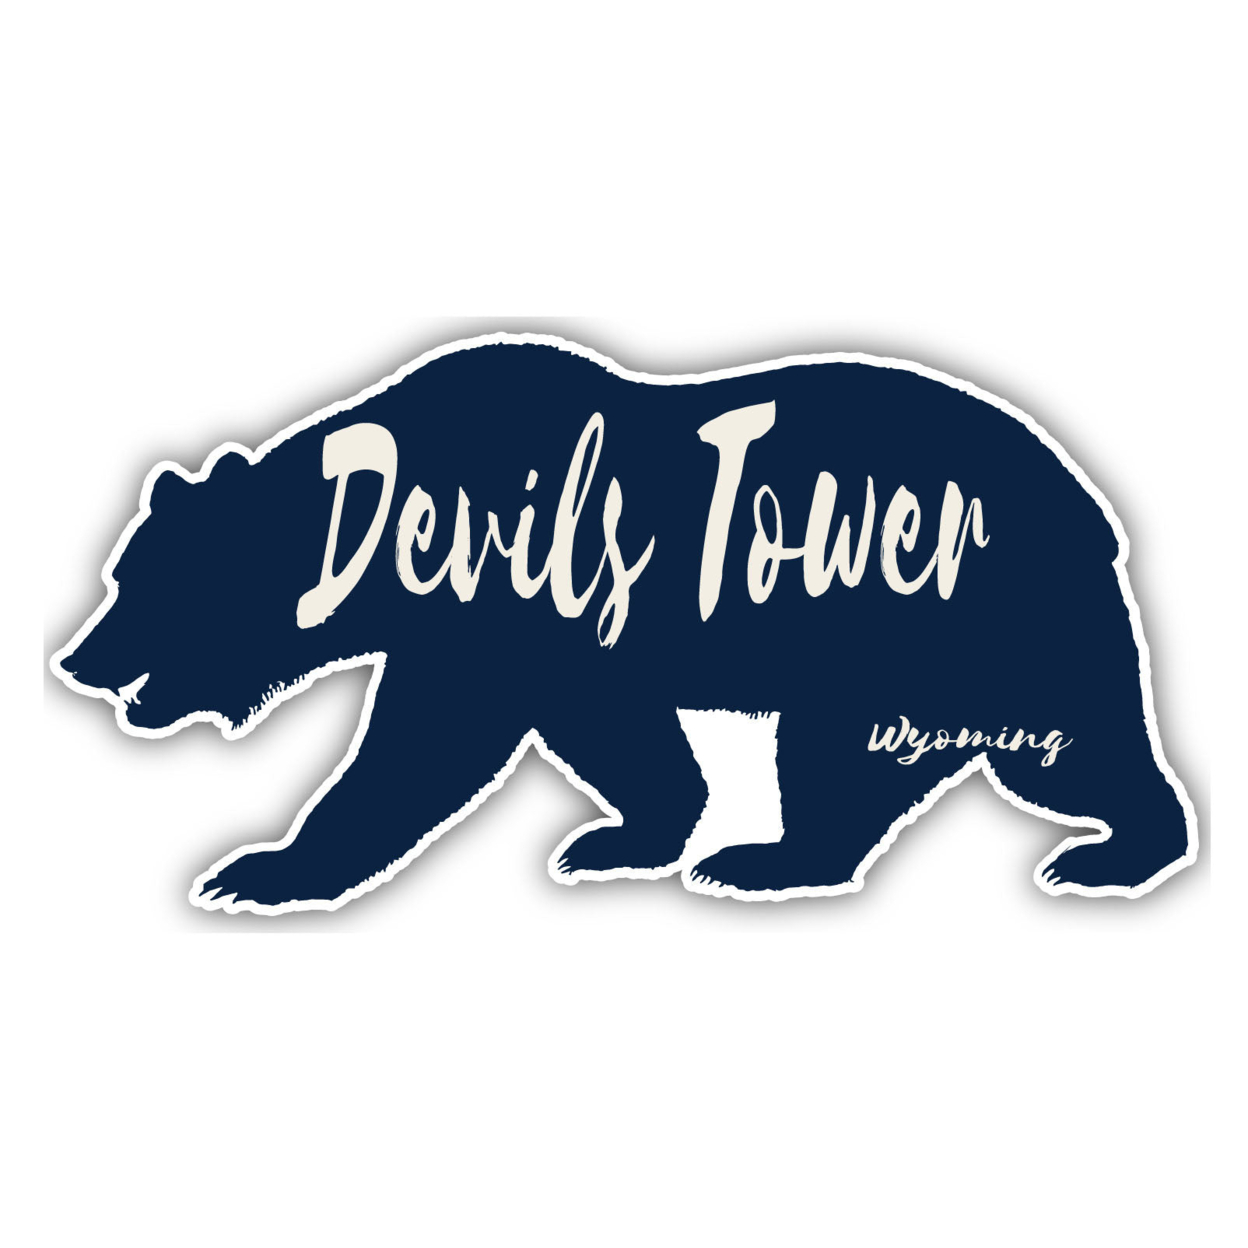 Devils Tower Wyoming Souvenir Decorative Stickers (Choose Theme And Size) - 4-Pack, 2-Inch, Tent